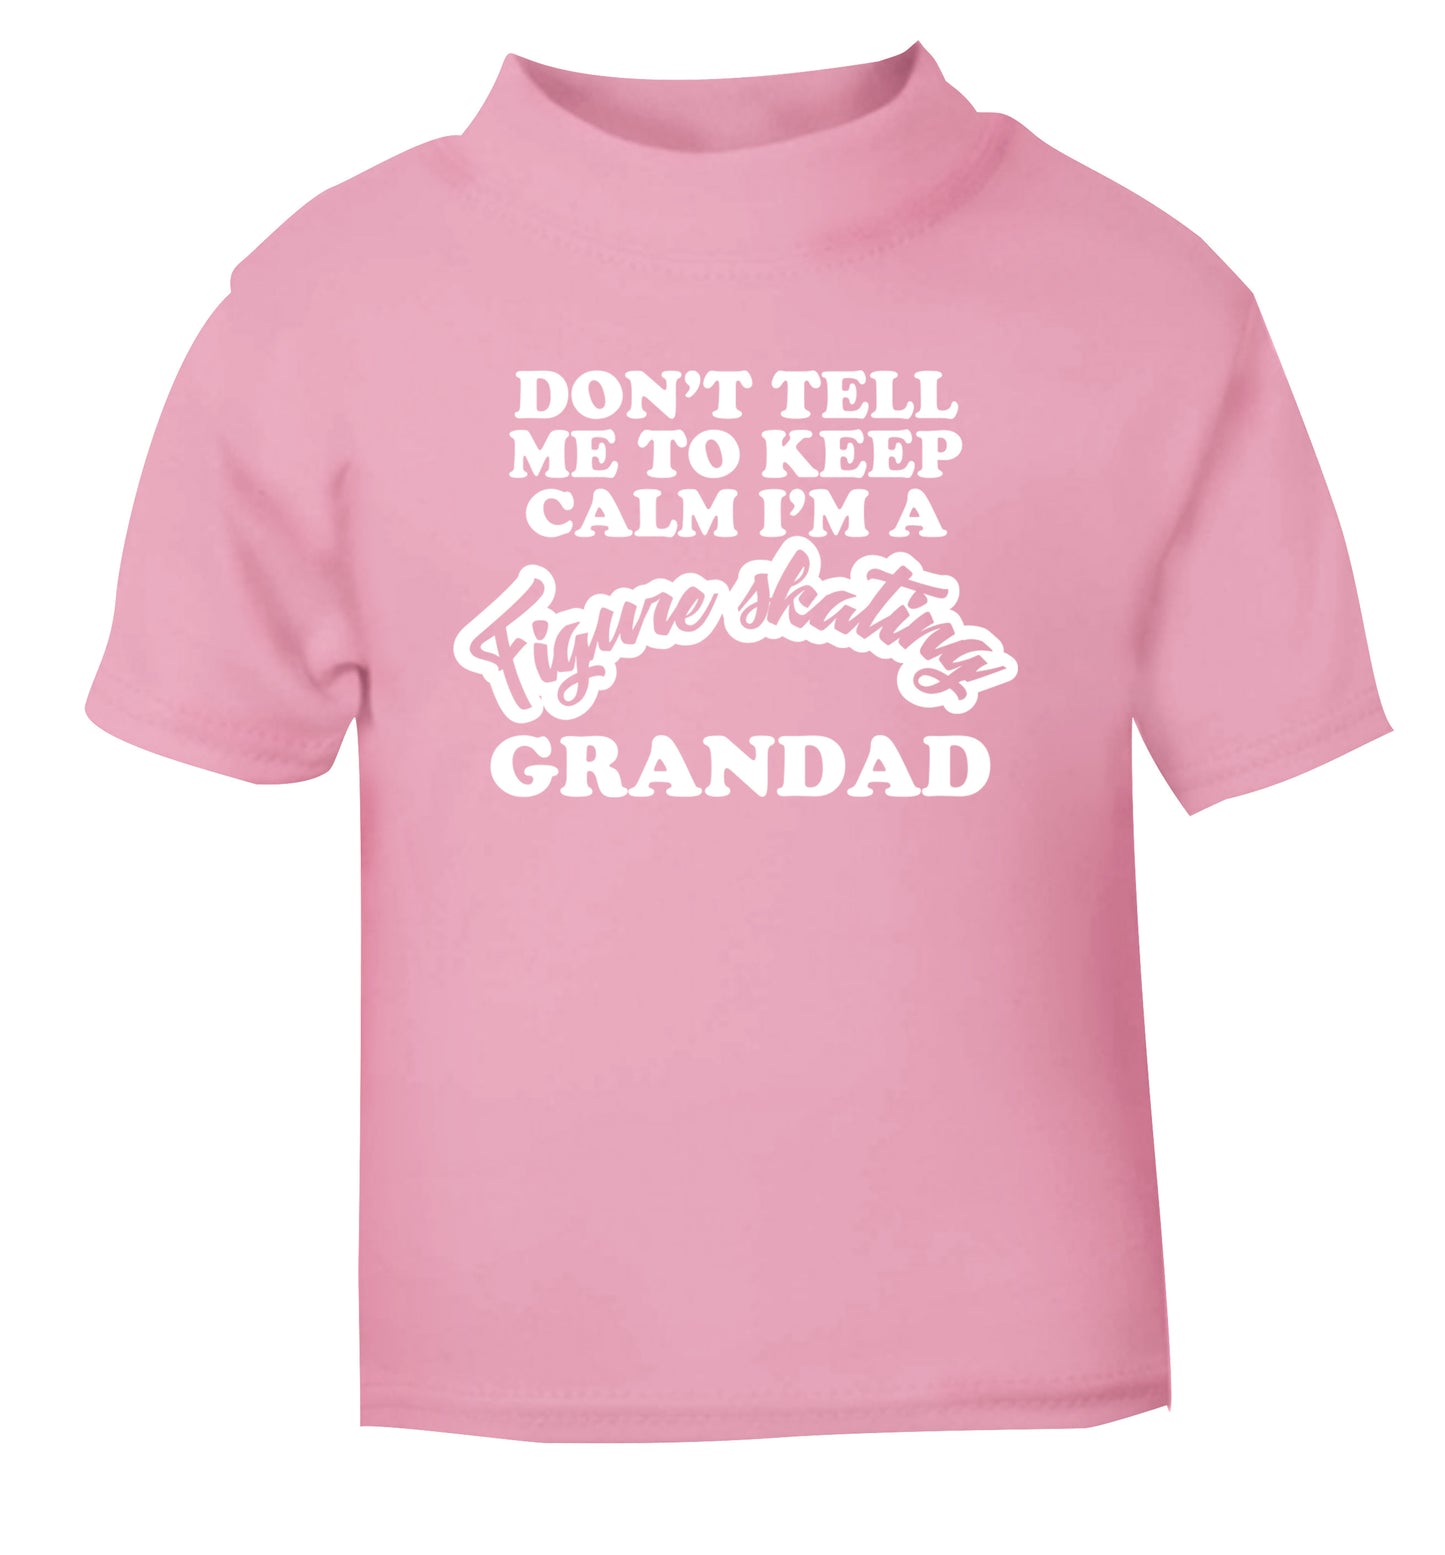 Don't tell me to keep calm I'm a figure skating grandad light pink Baby Toddler Tshirt 2 Years